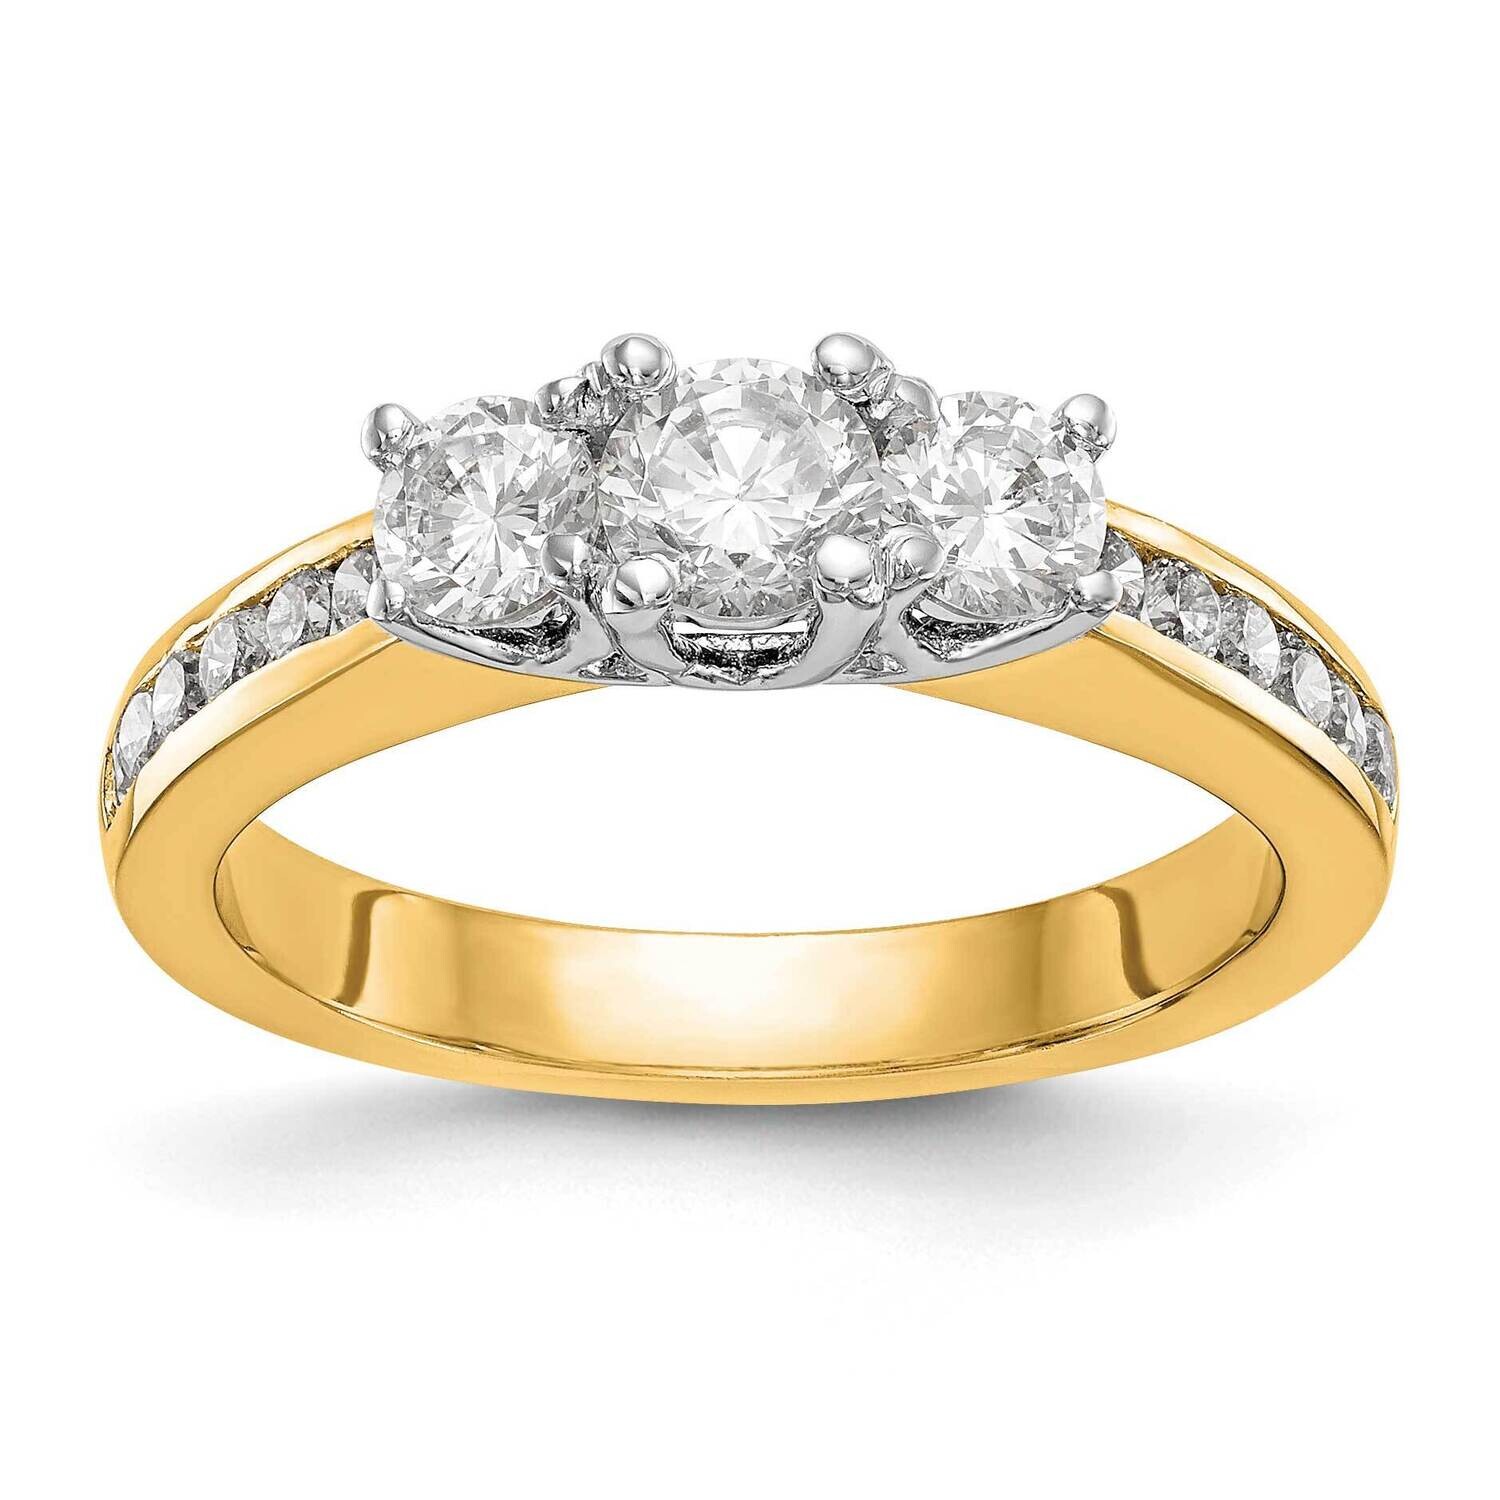 3-Stone Plus Holds 1/4 Carat 4.1mm Round Center 2-3.1mm Round Sides Diamond Semi-Mount Engagement Ring 14k Two-Tone Gold RM2979E-025-YWAA